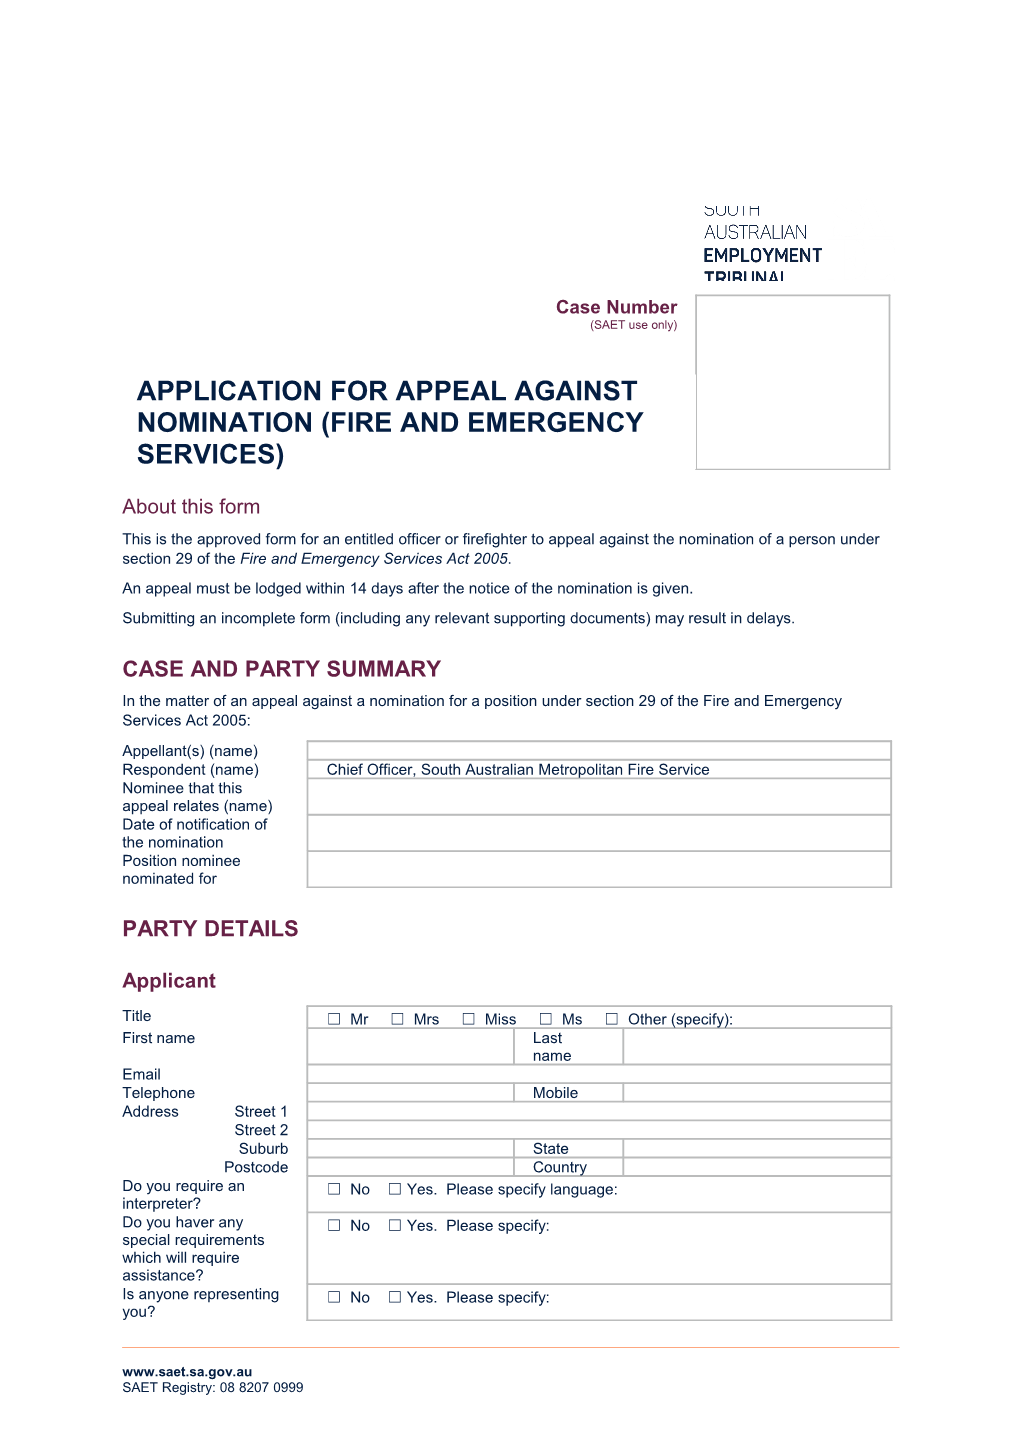 Application for Appeal Against Nomination (Fire and Emergency Services)